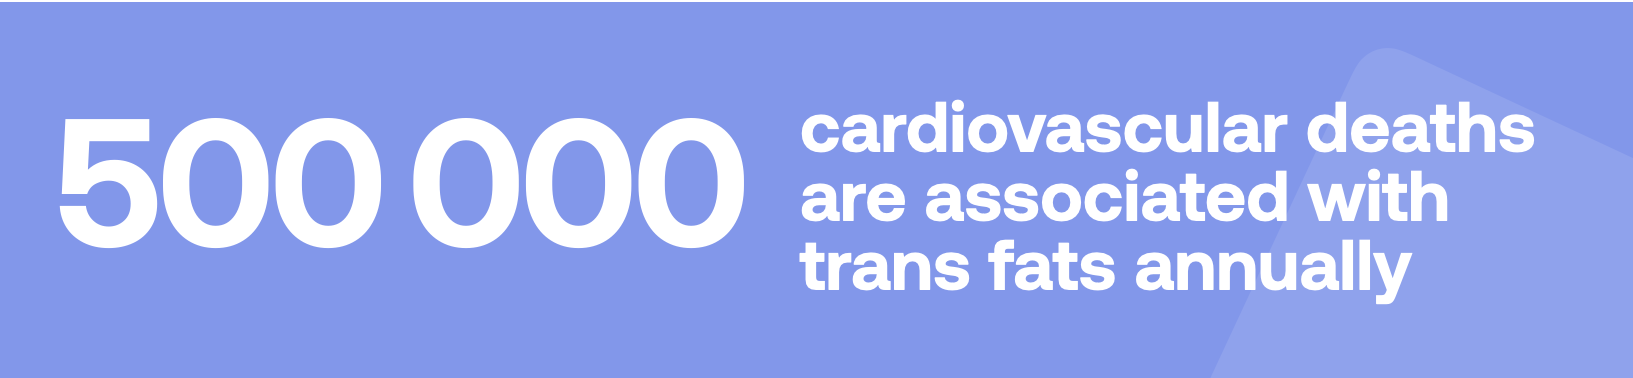 500000 cardiovascular deaths are associated with trans fats annually